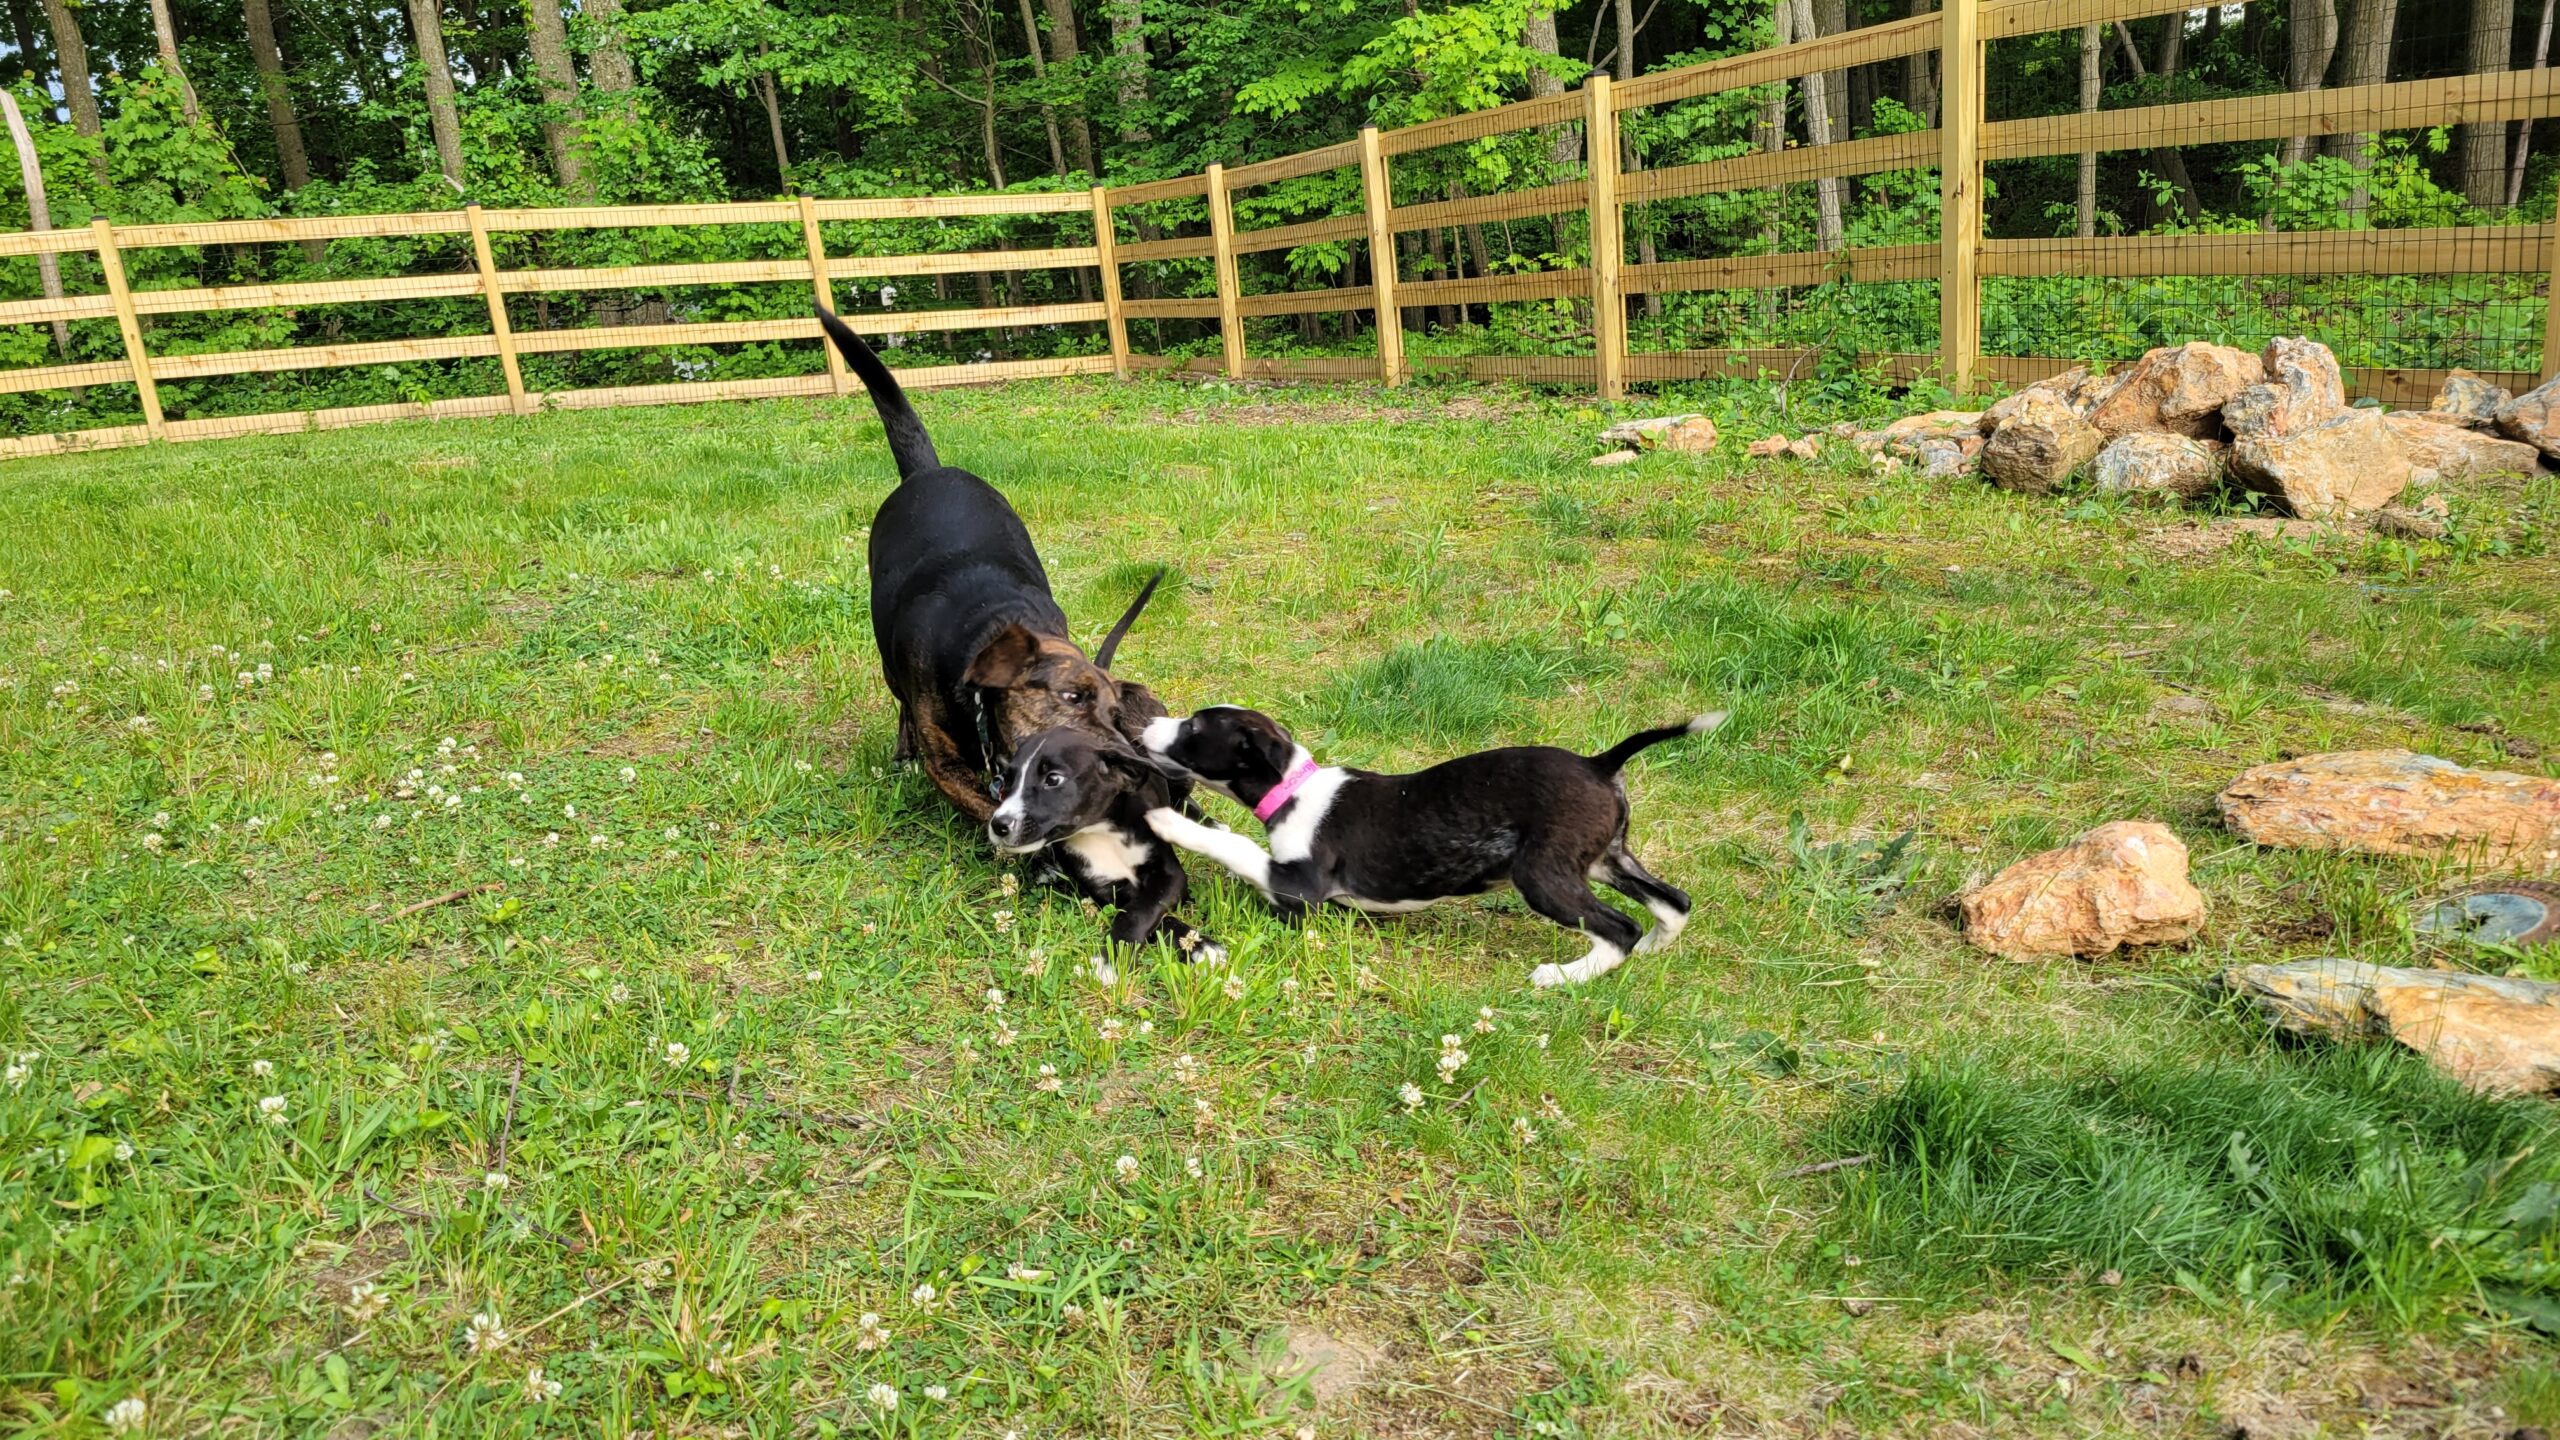 Photo of an adult Beagle mix dog playing with two 10-week-old black and white puppies in a grassy yard.